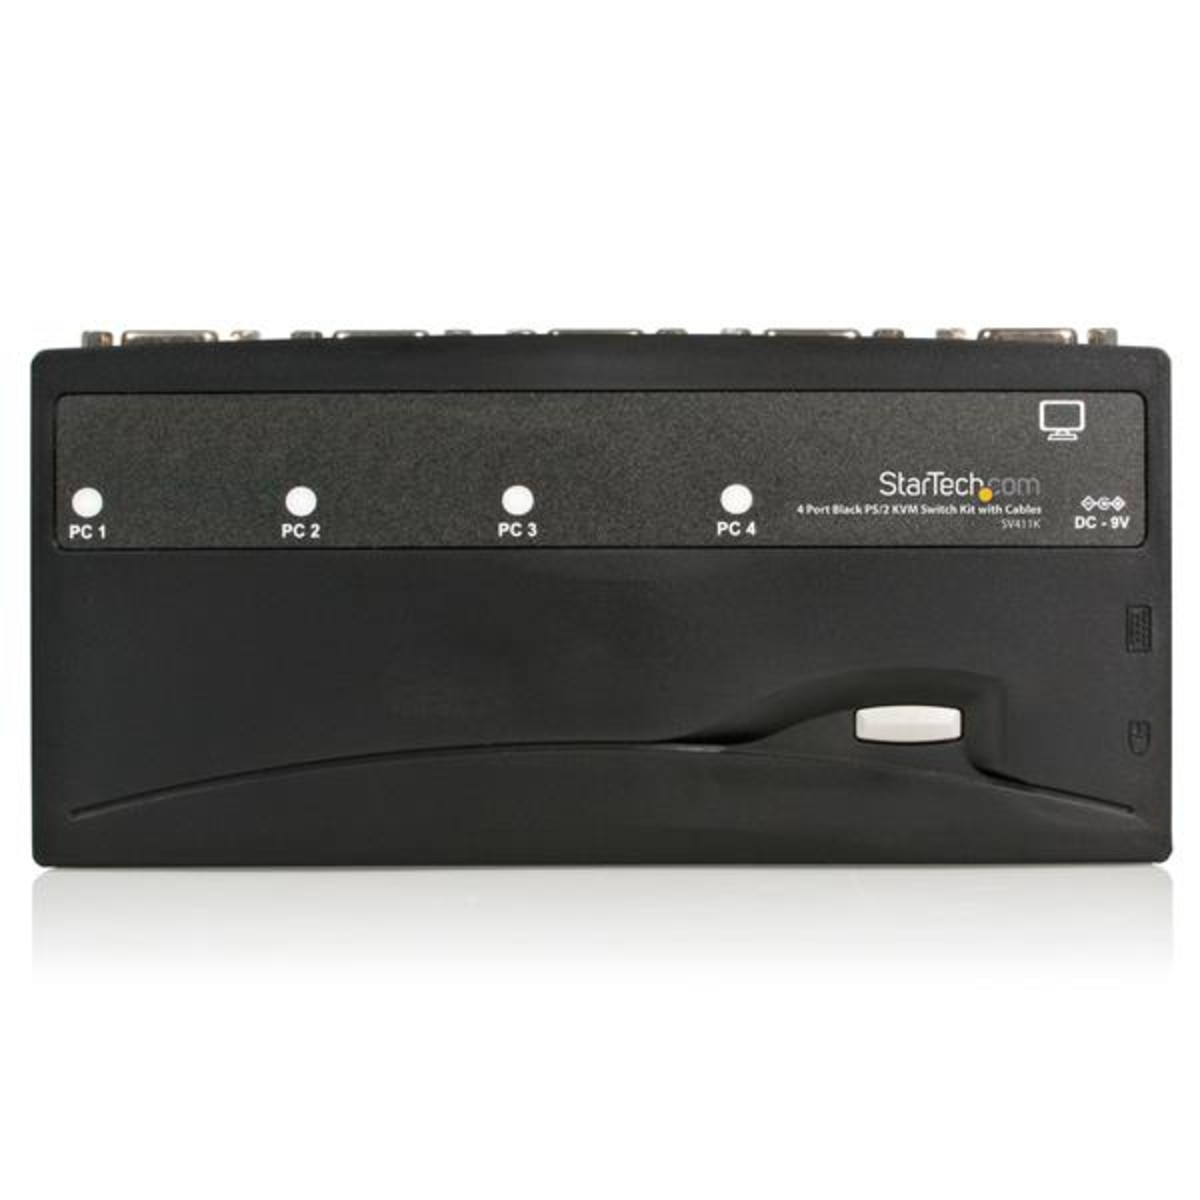 4 Port PS/2 KVM Switch Kit with Cables